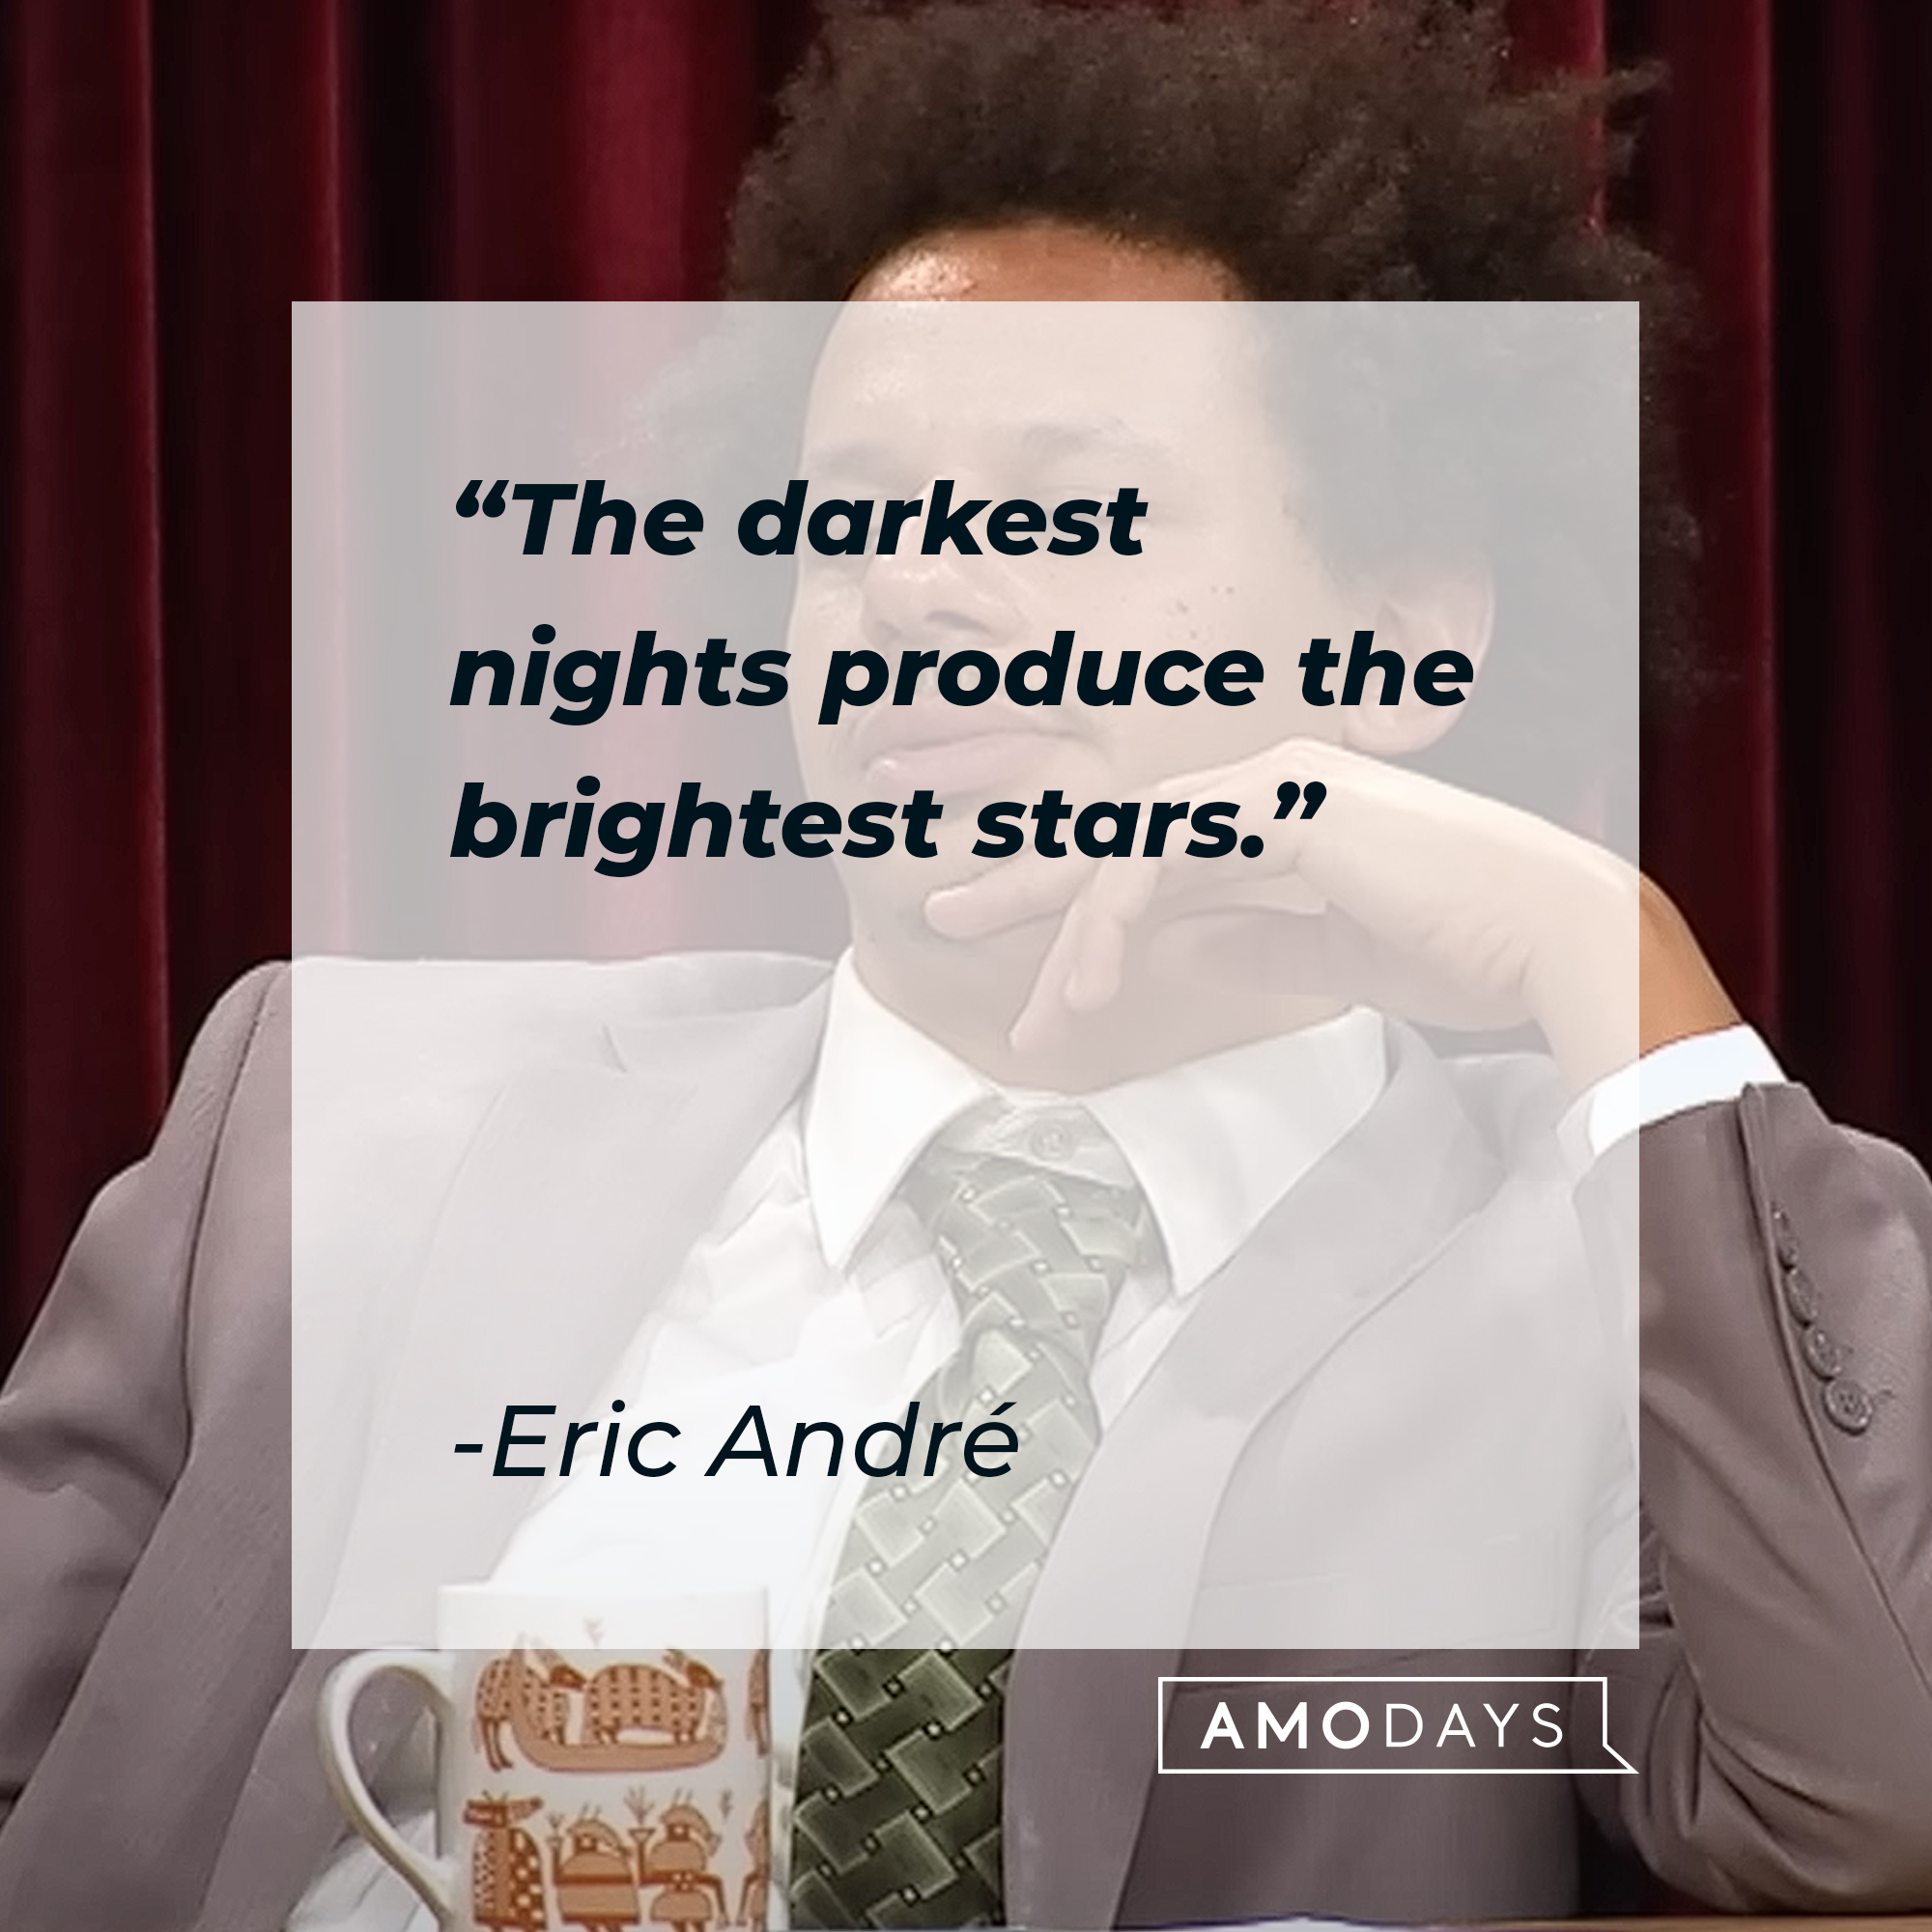 Eric André's quote: "The darkest nights produce the brightest stars." | Source: Youtube.com/adultswim